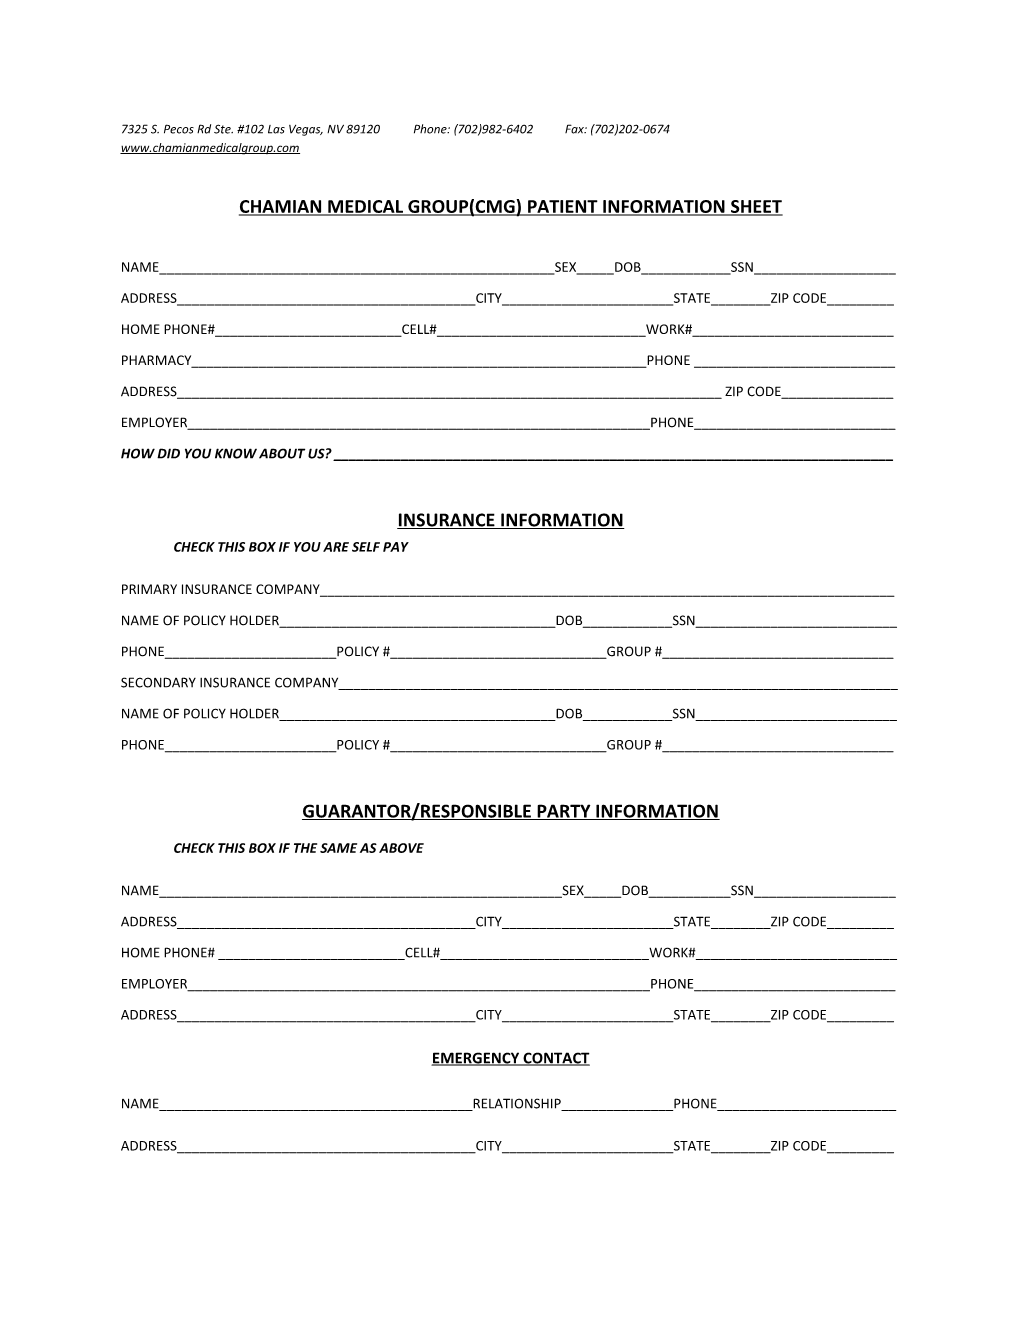 Chamian Medical Group(Cmg) Patient Information Sheet